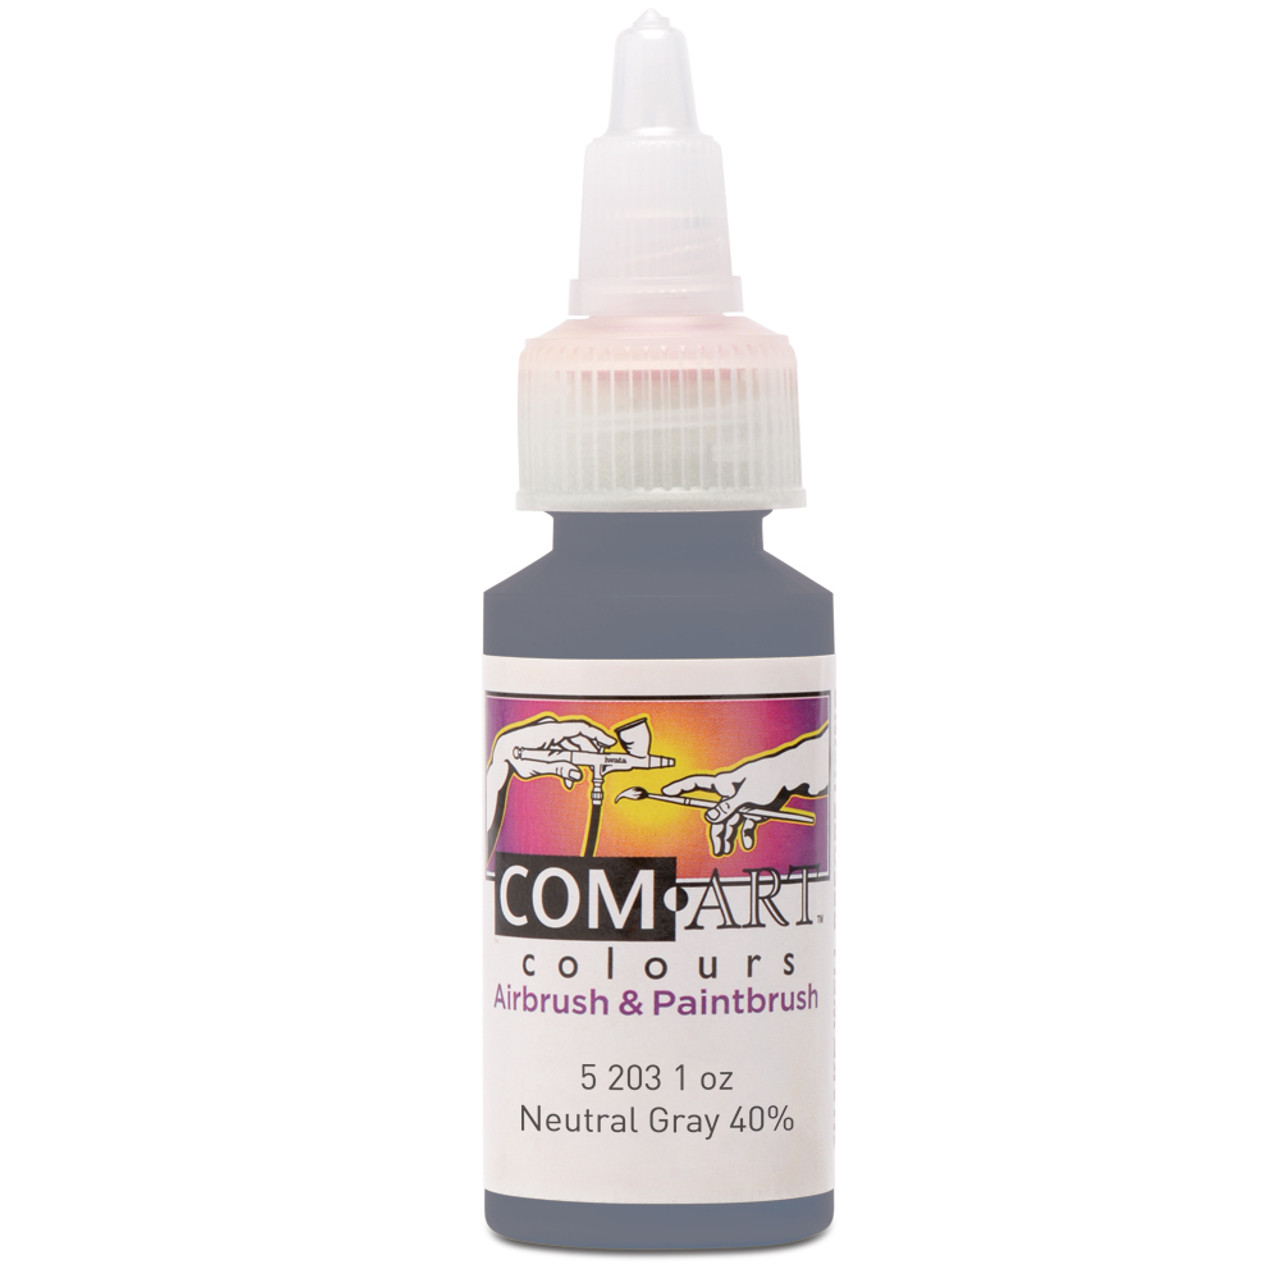 Com Art Colours Water-Based Acrylic Opaque Neutral Gray 40% 1oz For Airbrush And Paintbrush